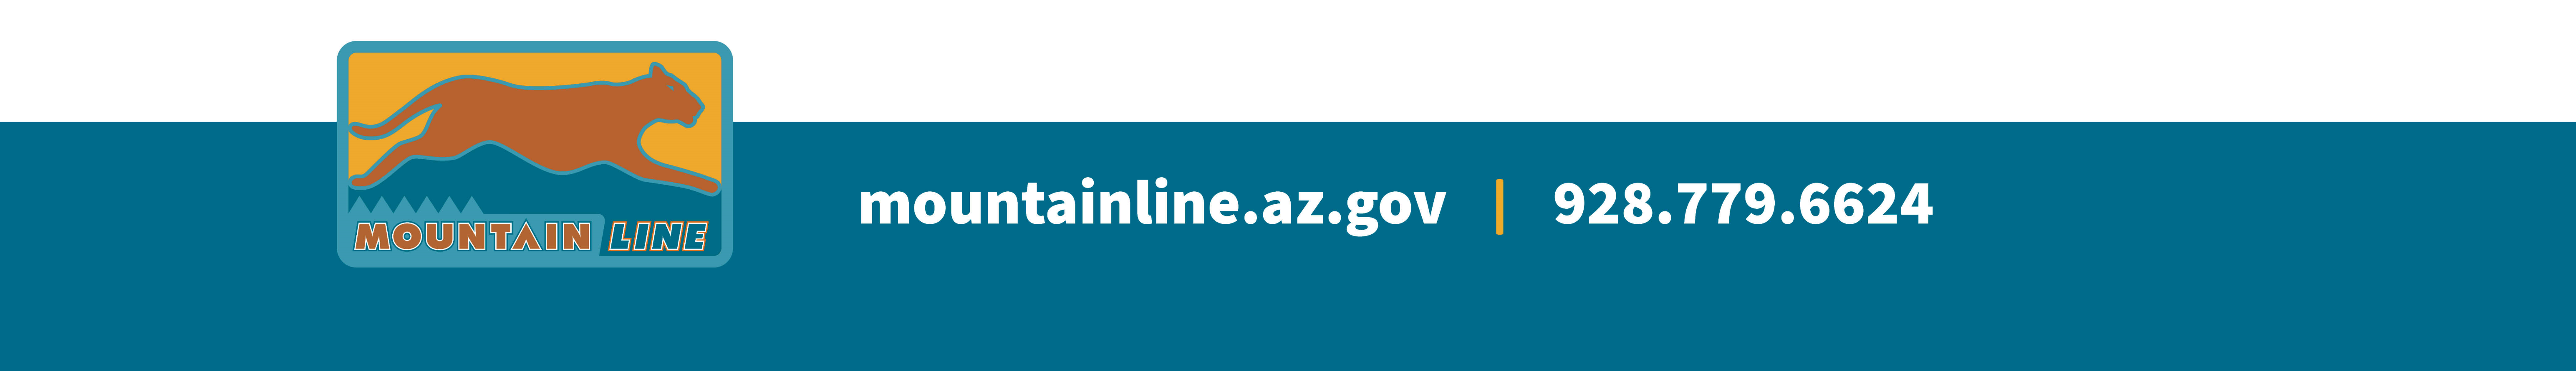 Mountain Line logo with the phone number: 928.779.6624 and website: mountainline.az.gov 